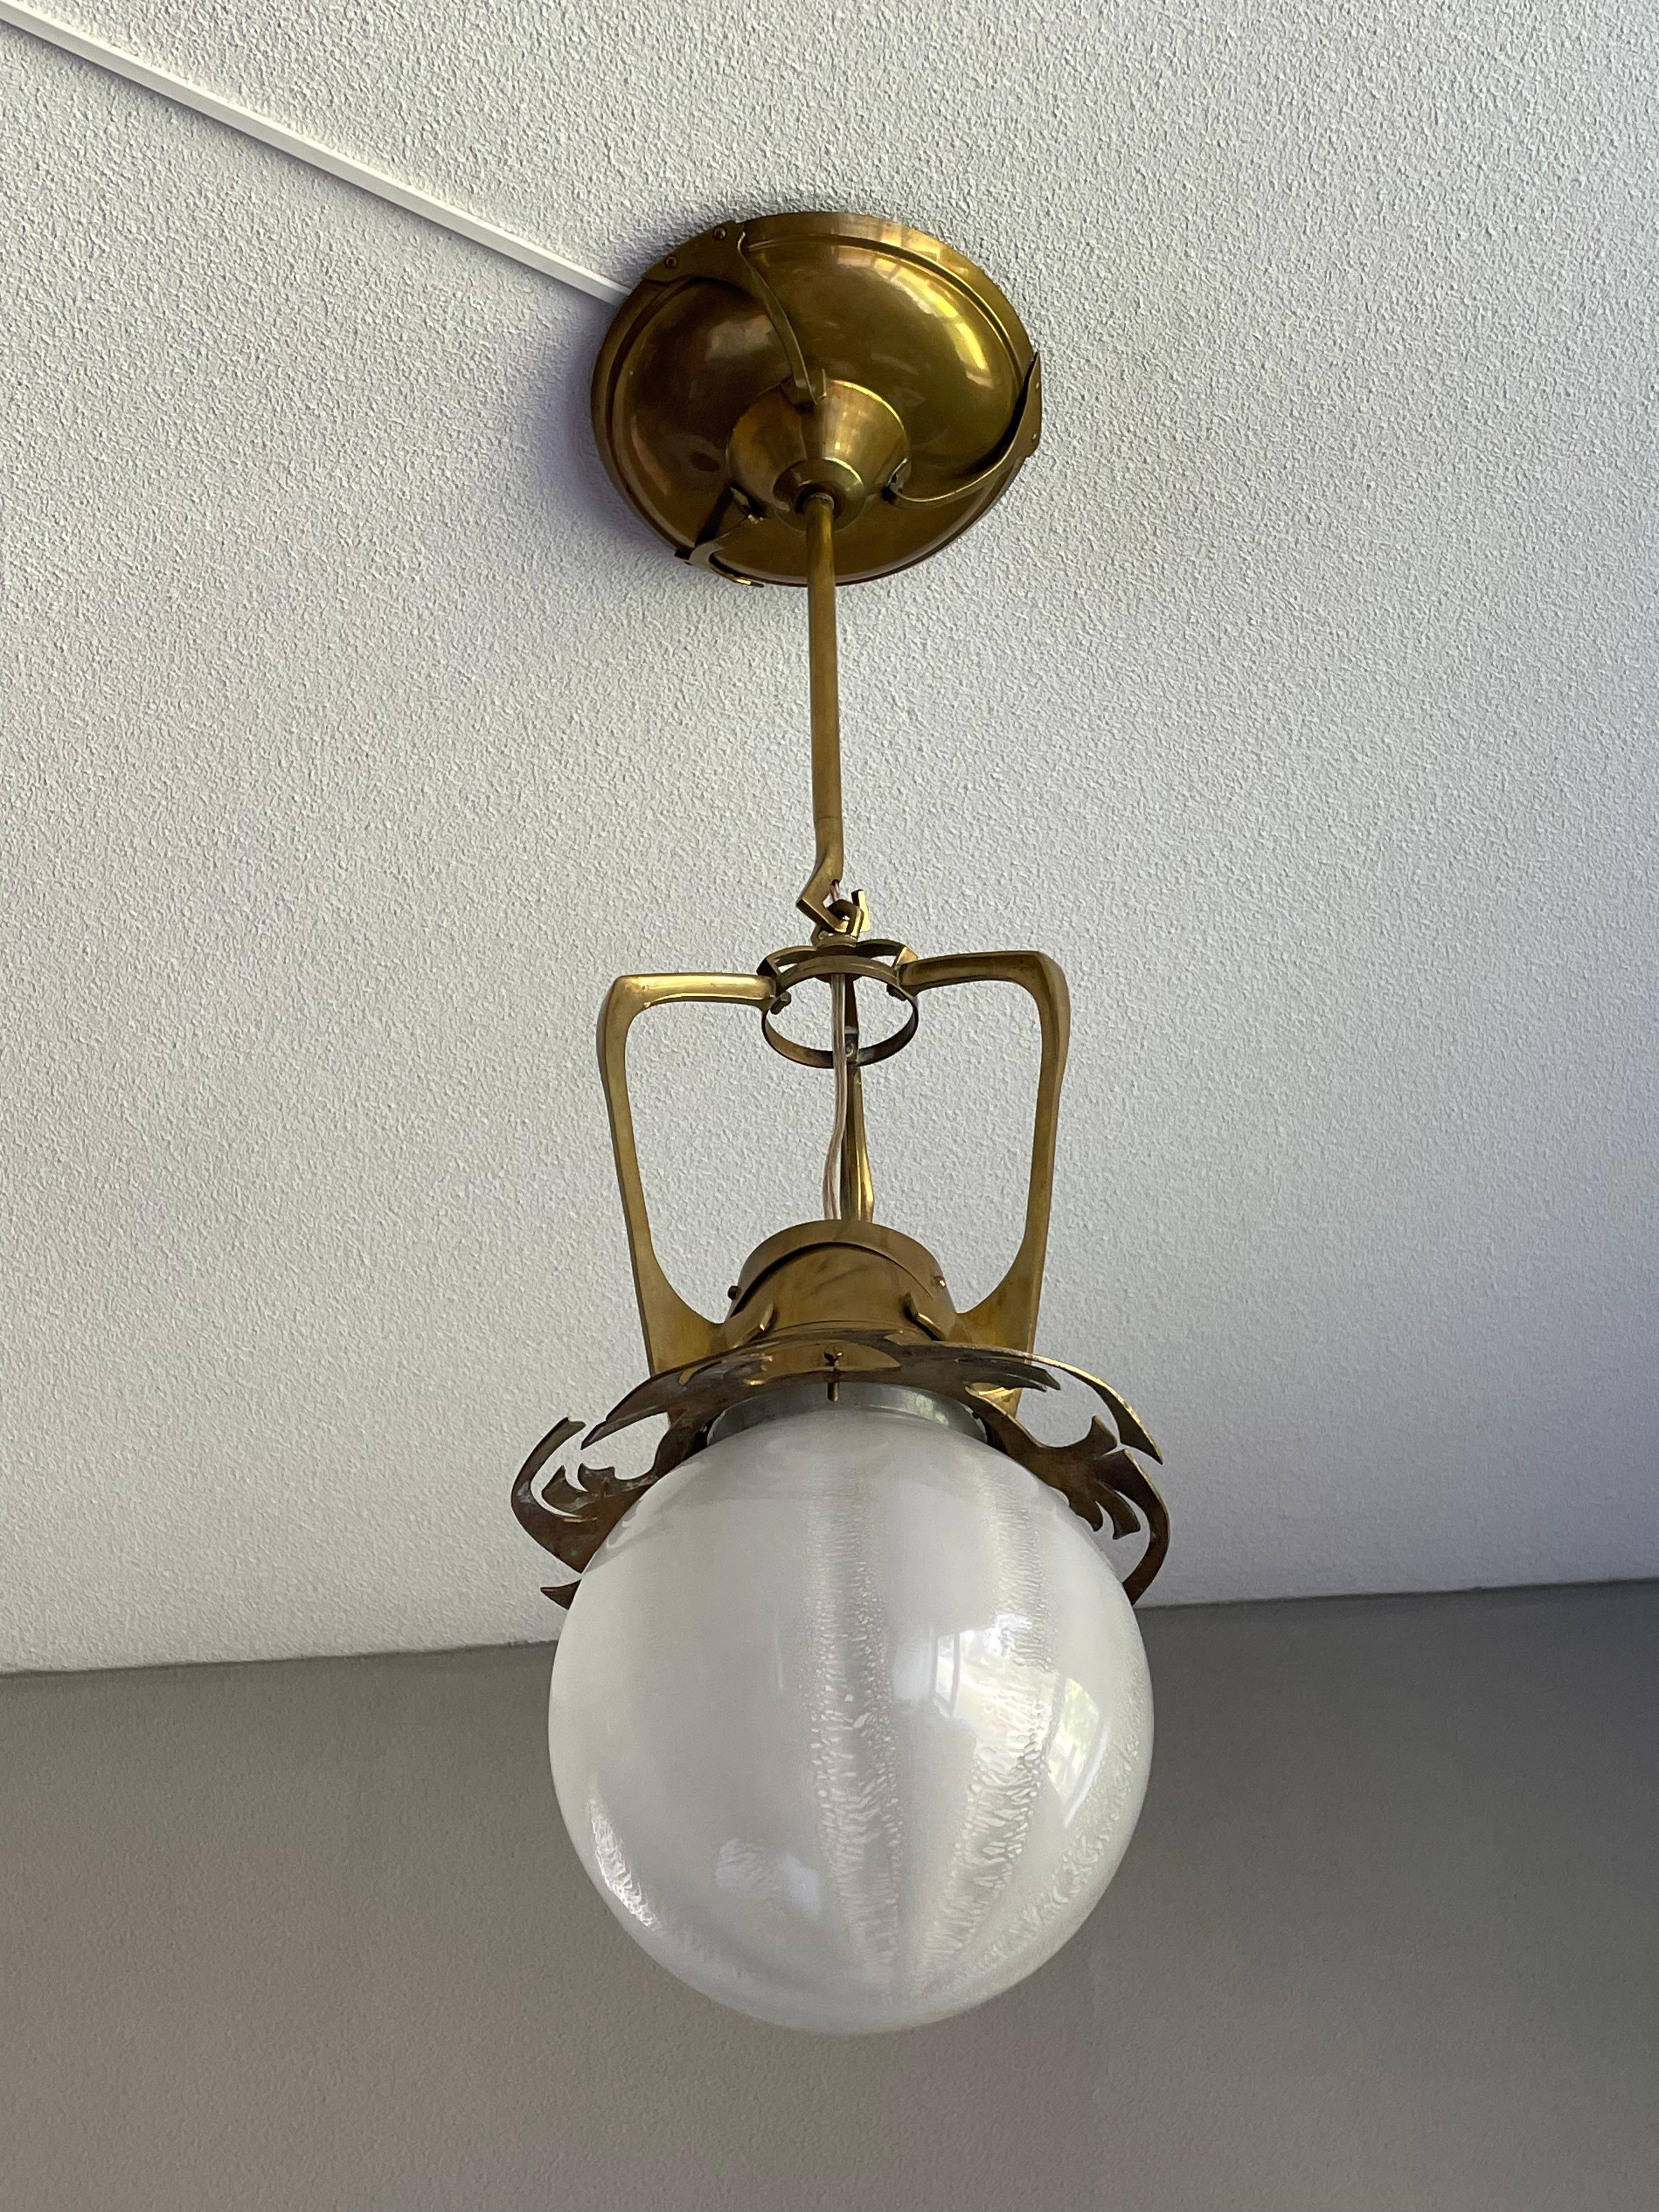 Unique Dutch Arts & Crafts Brass Pendant Light With Rare Tin Crackle Globe Shade For Sale 11